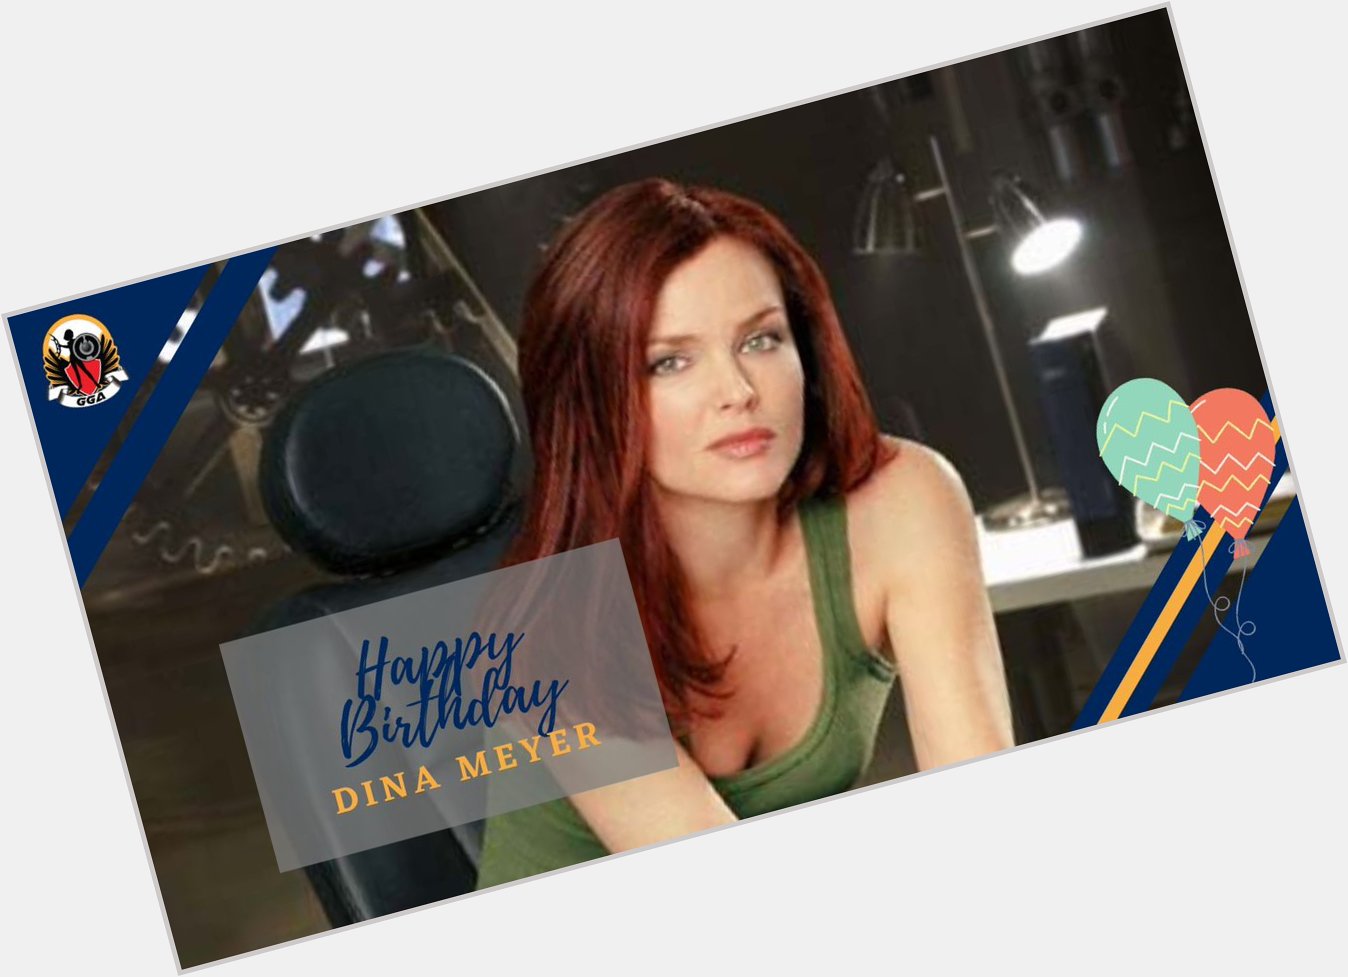 Happy birthday Dina Meyer!  Which role of hers is your favorite?  